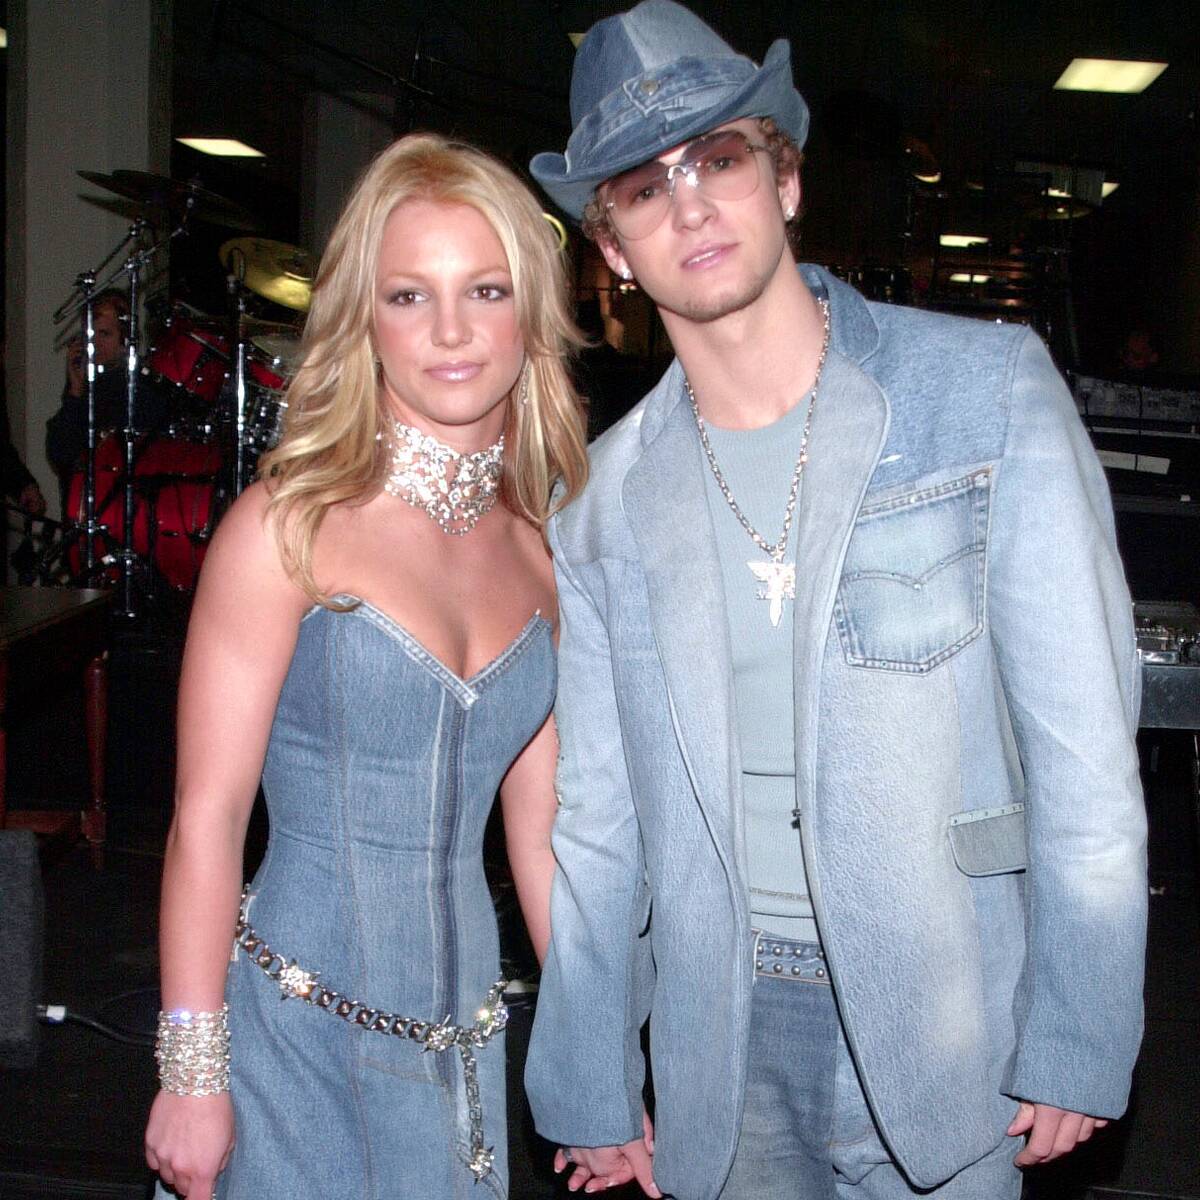 Jamie Lynn Spears' Reaction to Britney and Justin Timberlake's Denim Outfits Will Make Your Jaw Drop